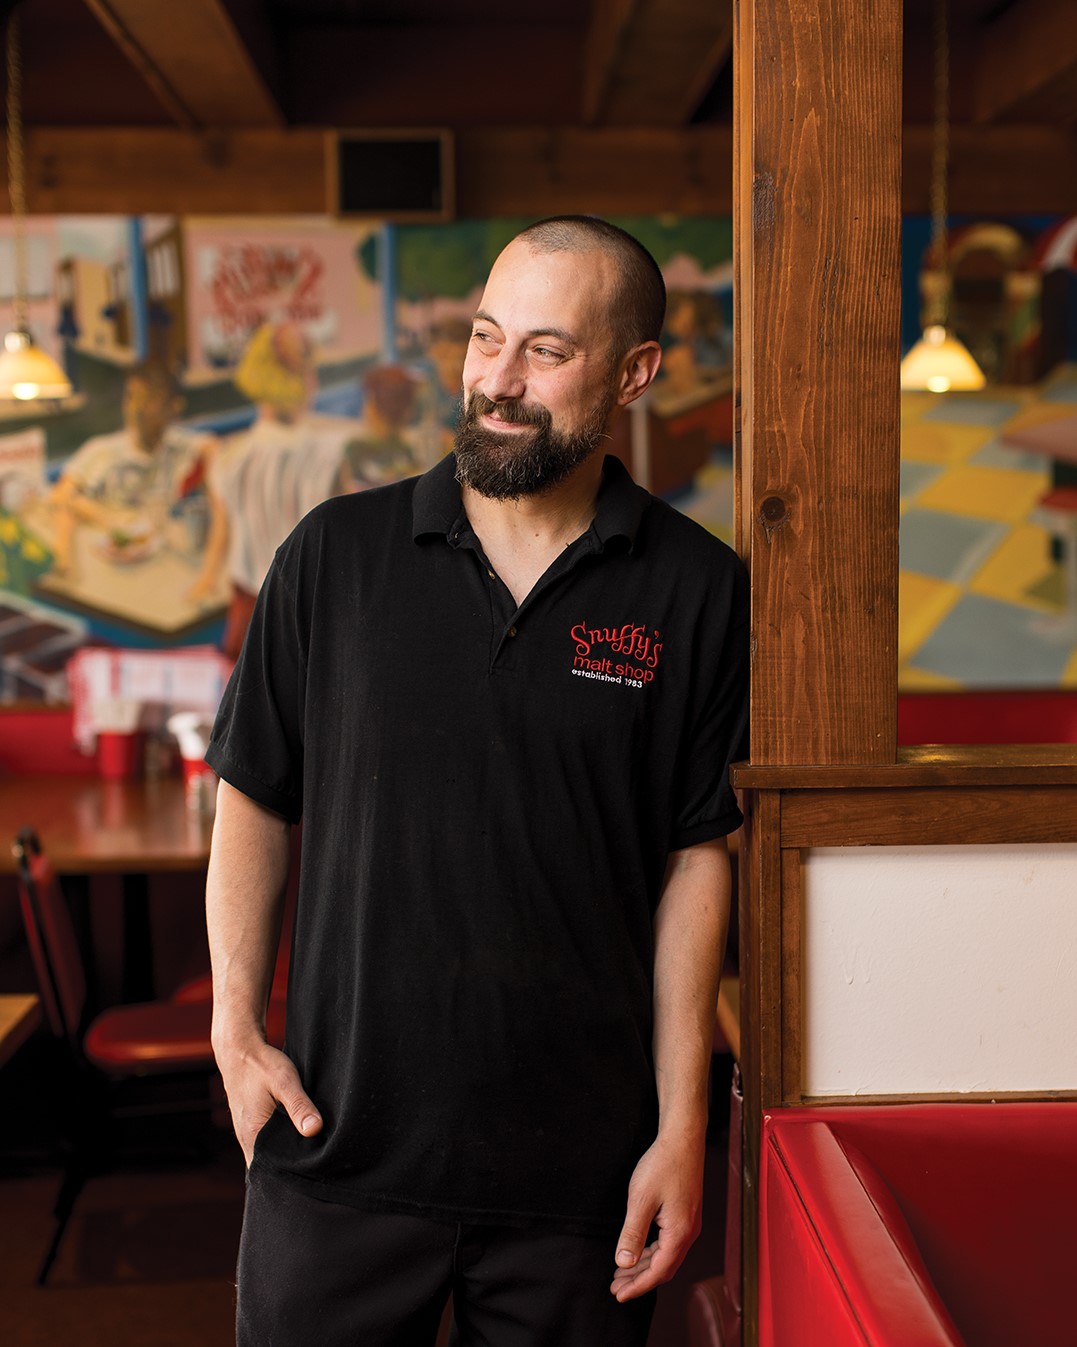 Rising through the ranks: Vincent Trojan started as a dishwasher 22 years ago. He’s now the general manager.